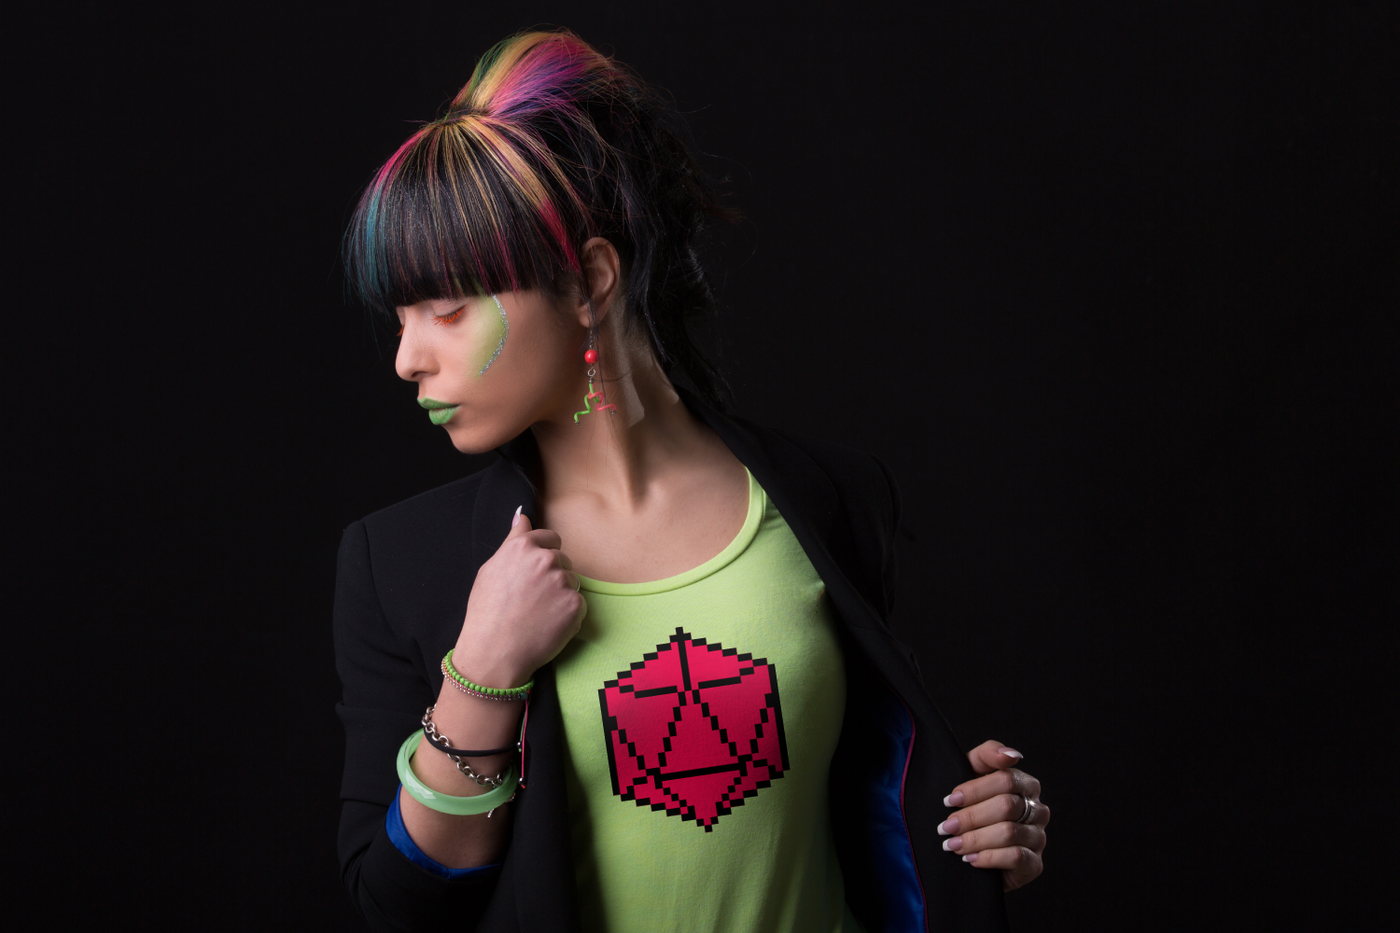 A woman of color with brightly colored neon makeup and neon streaks in her hair wears a black blazer and bright green tee. On the tee is a pink D20 done in 8-bit style.